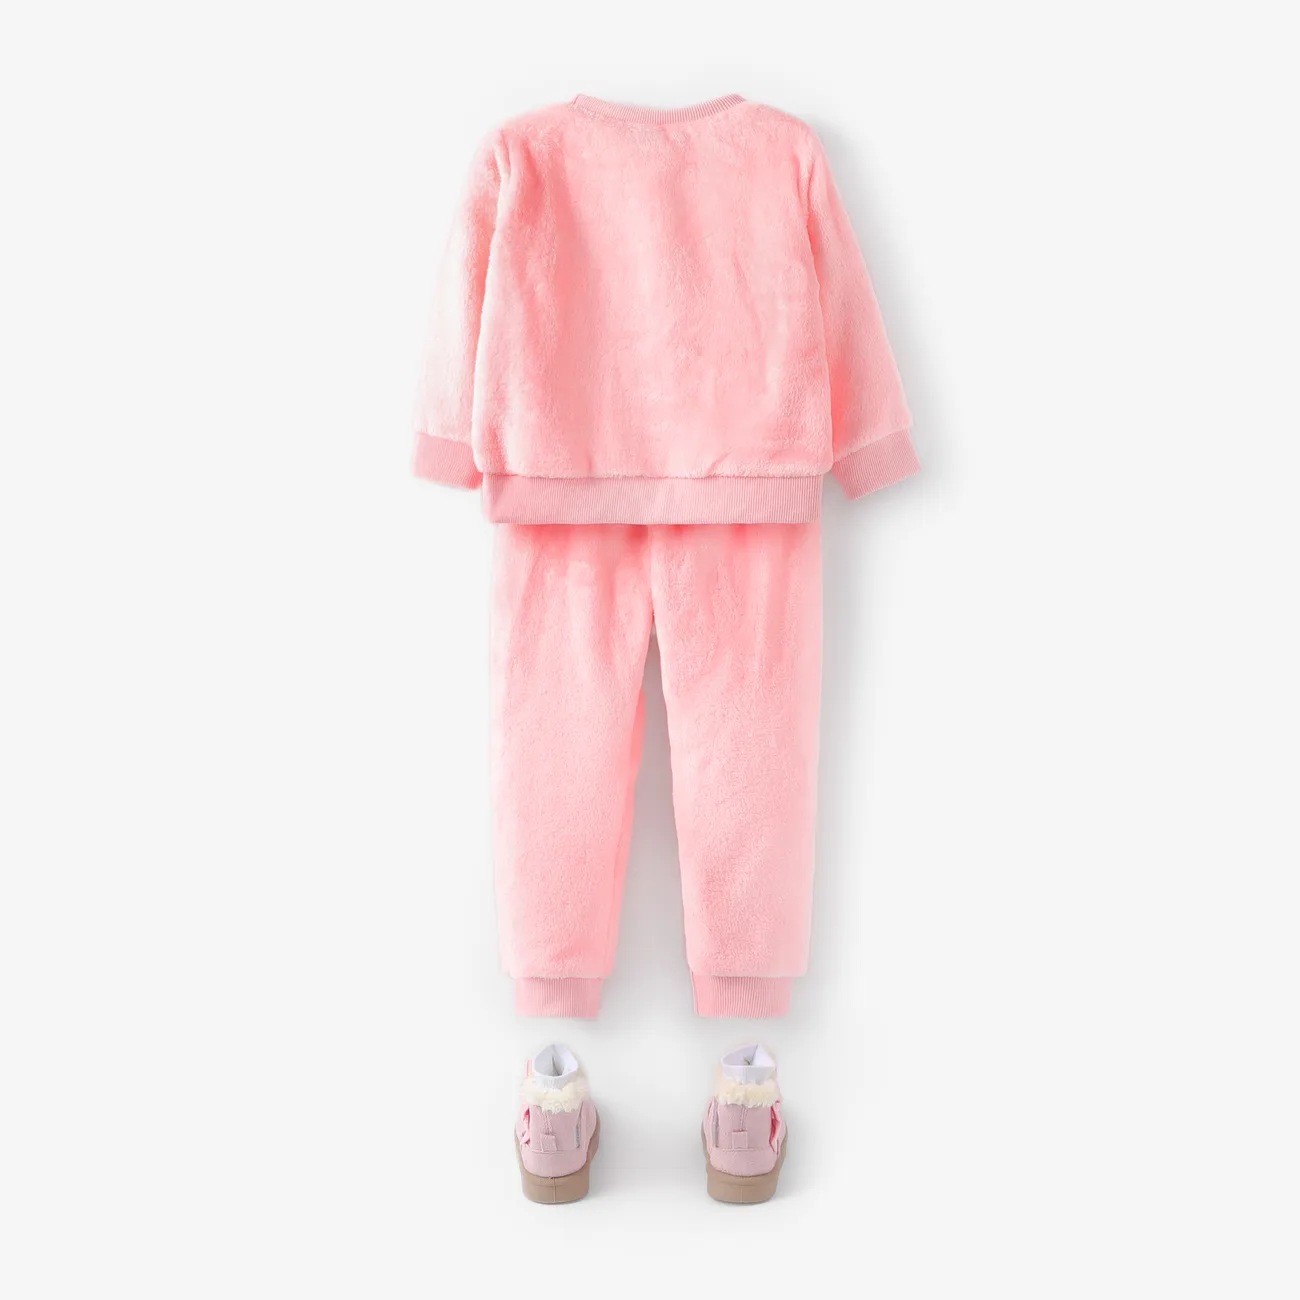 2-piece Toddler Girl Cat Pattern Fuzzy Pullover and Pink Pants Set Light Pink big image 1